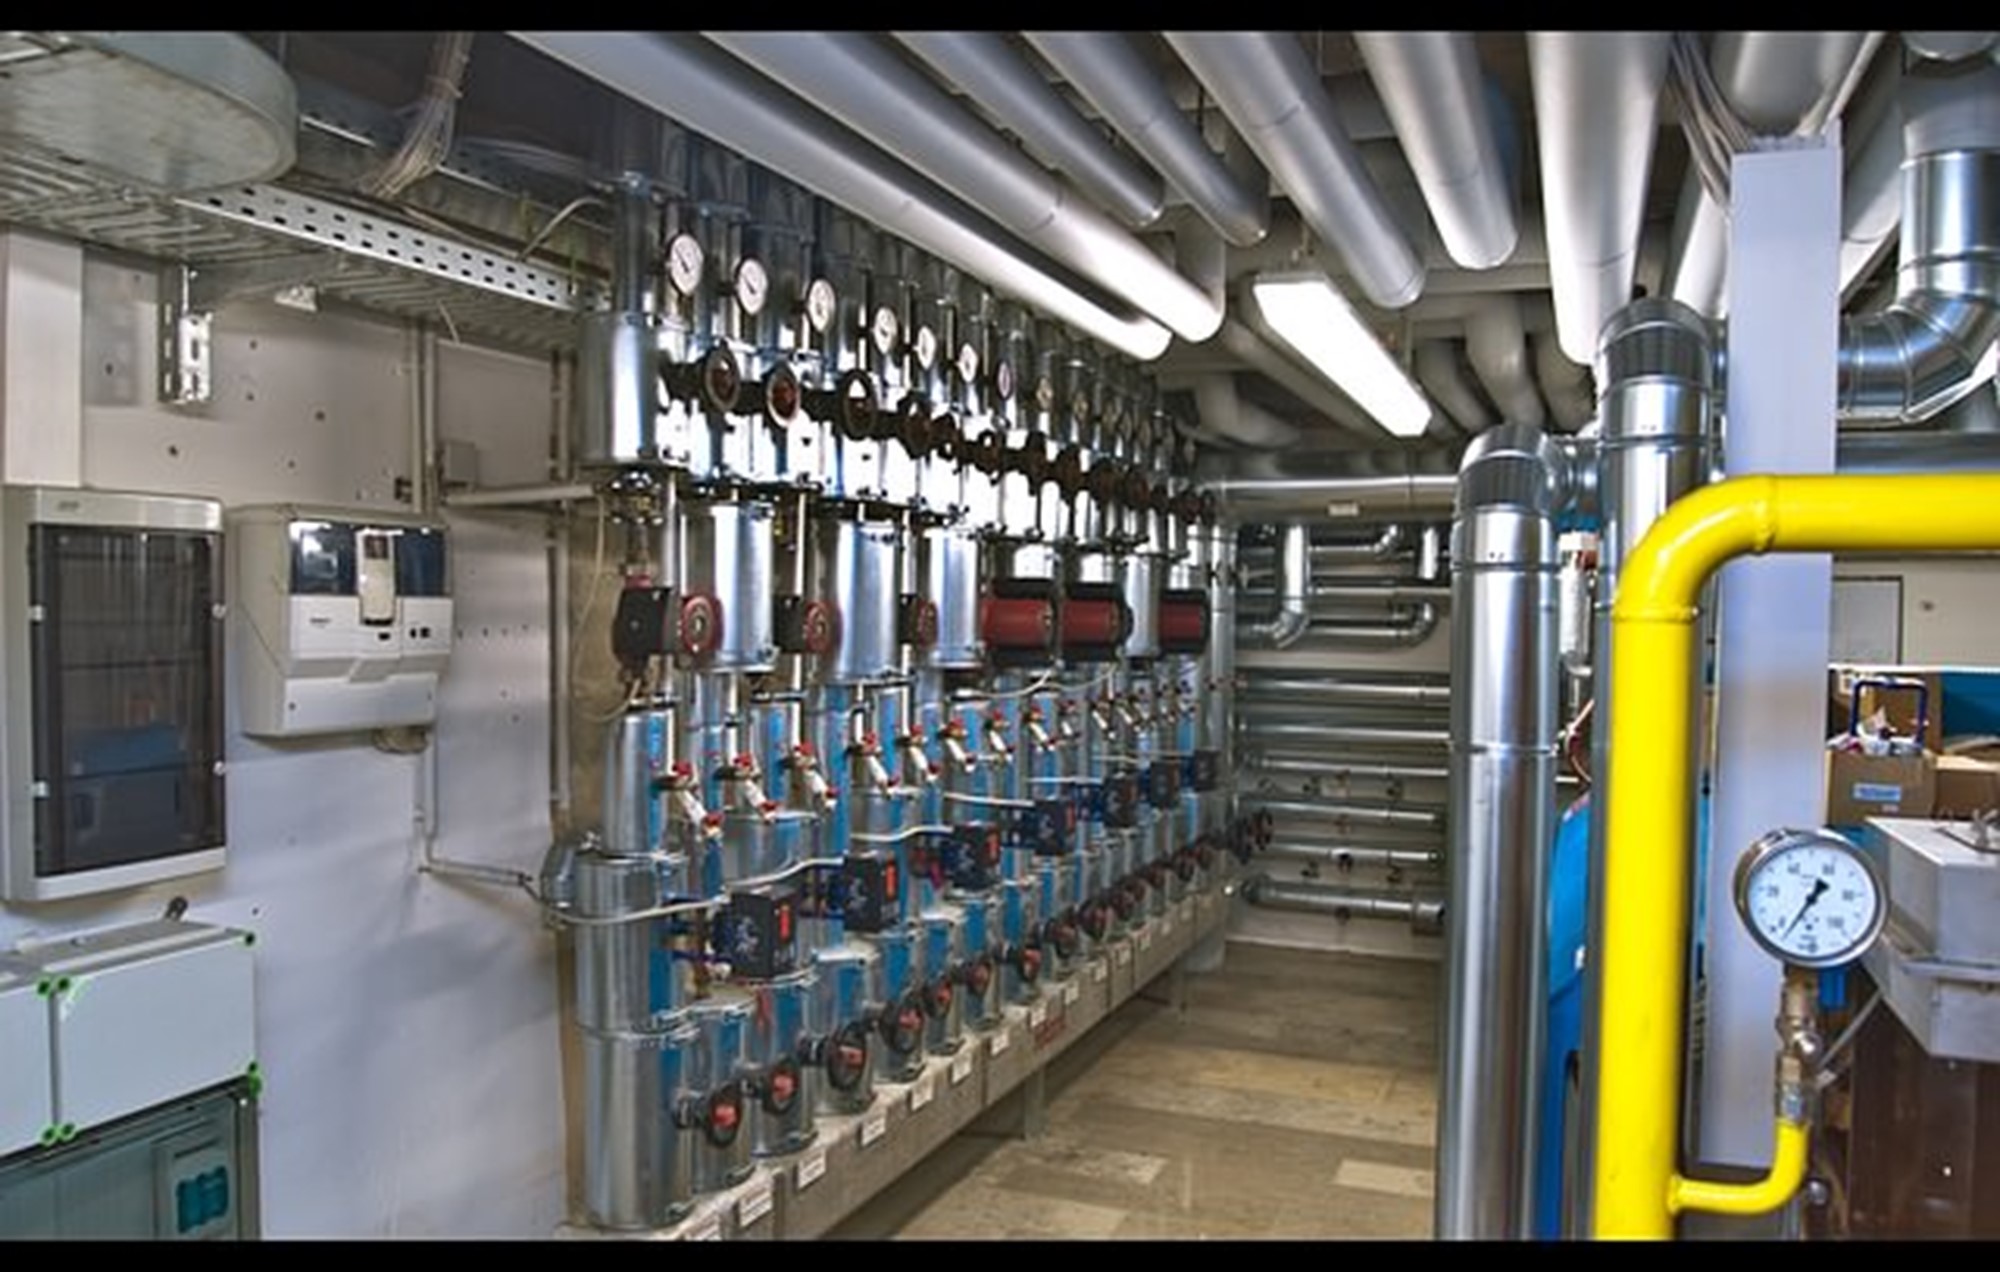 Closed heating and chilled systems